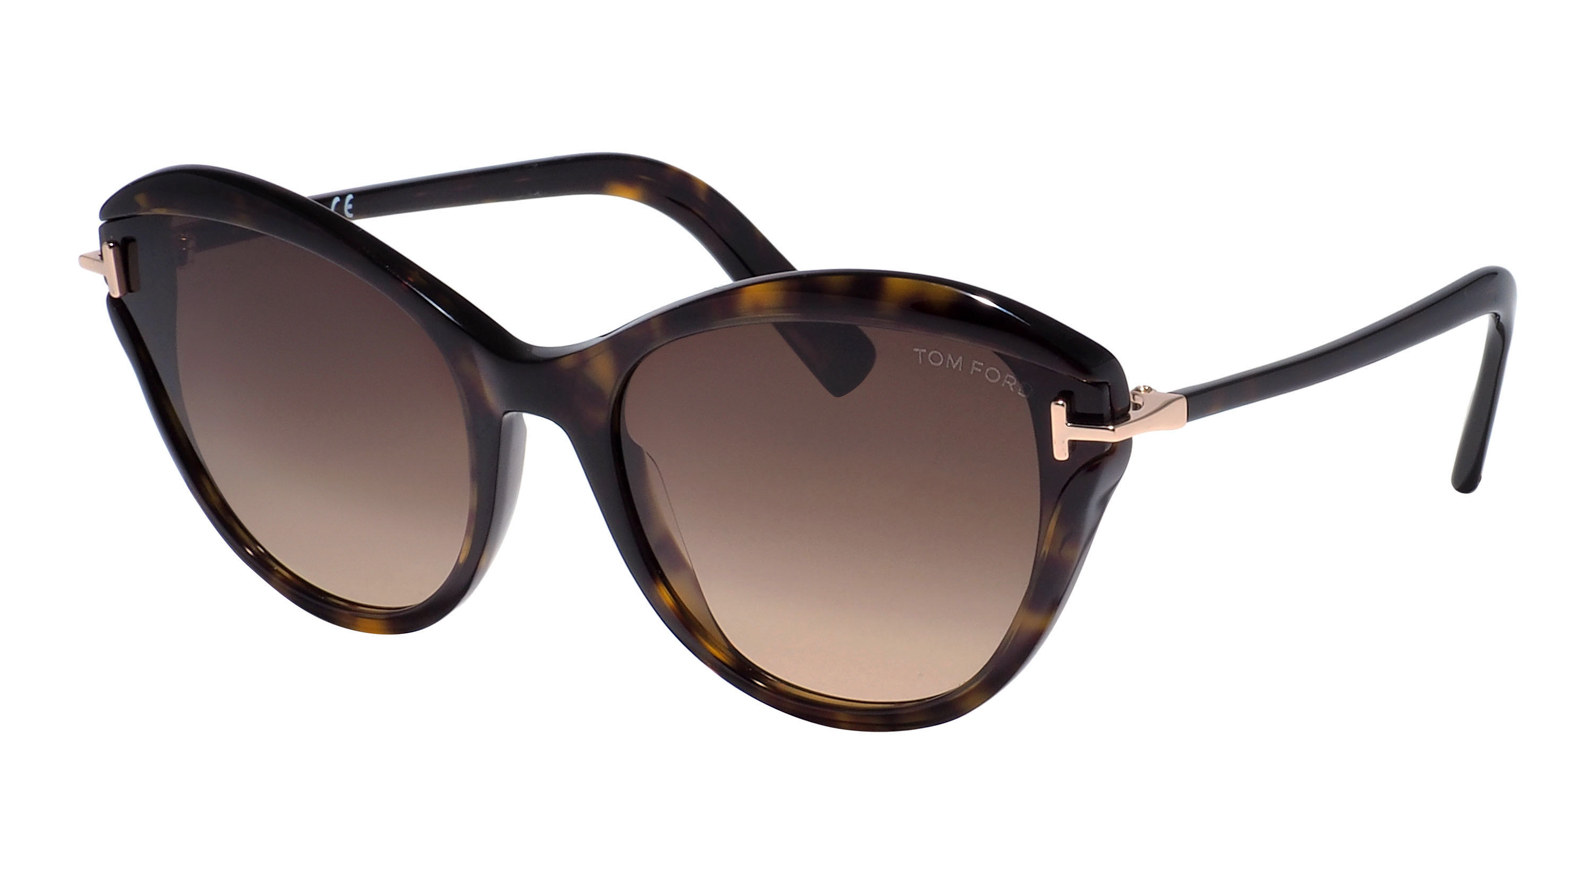 Tom Ford Leigh 850 52F tom ford leigh 850 52f